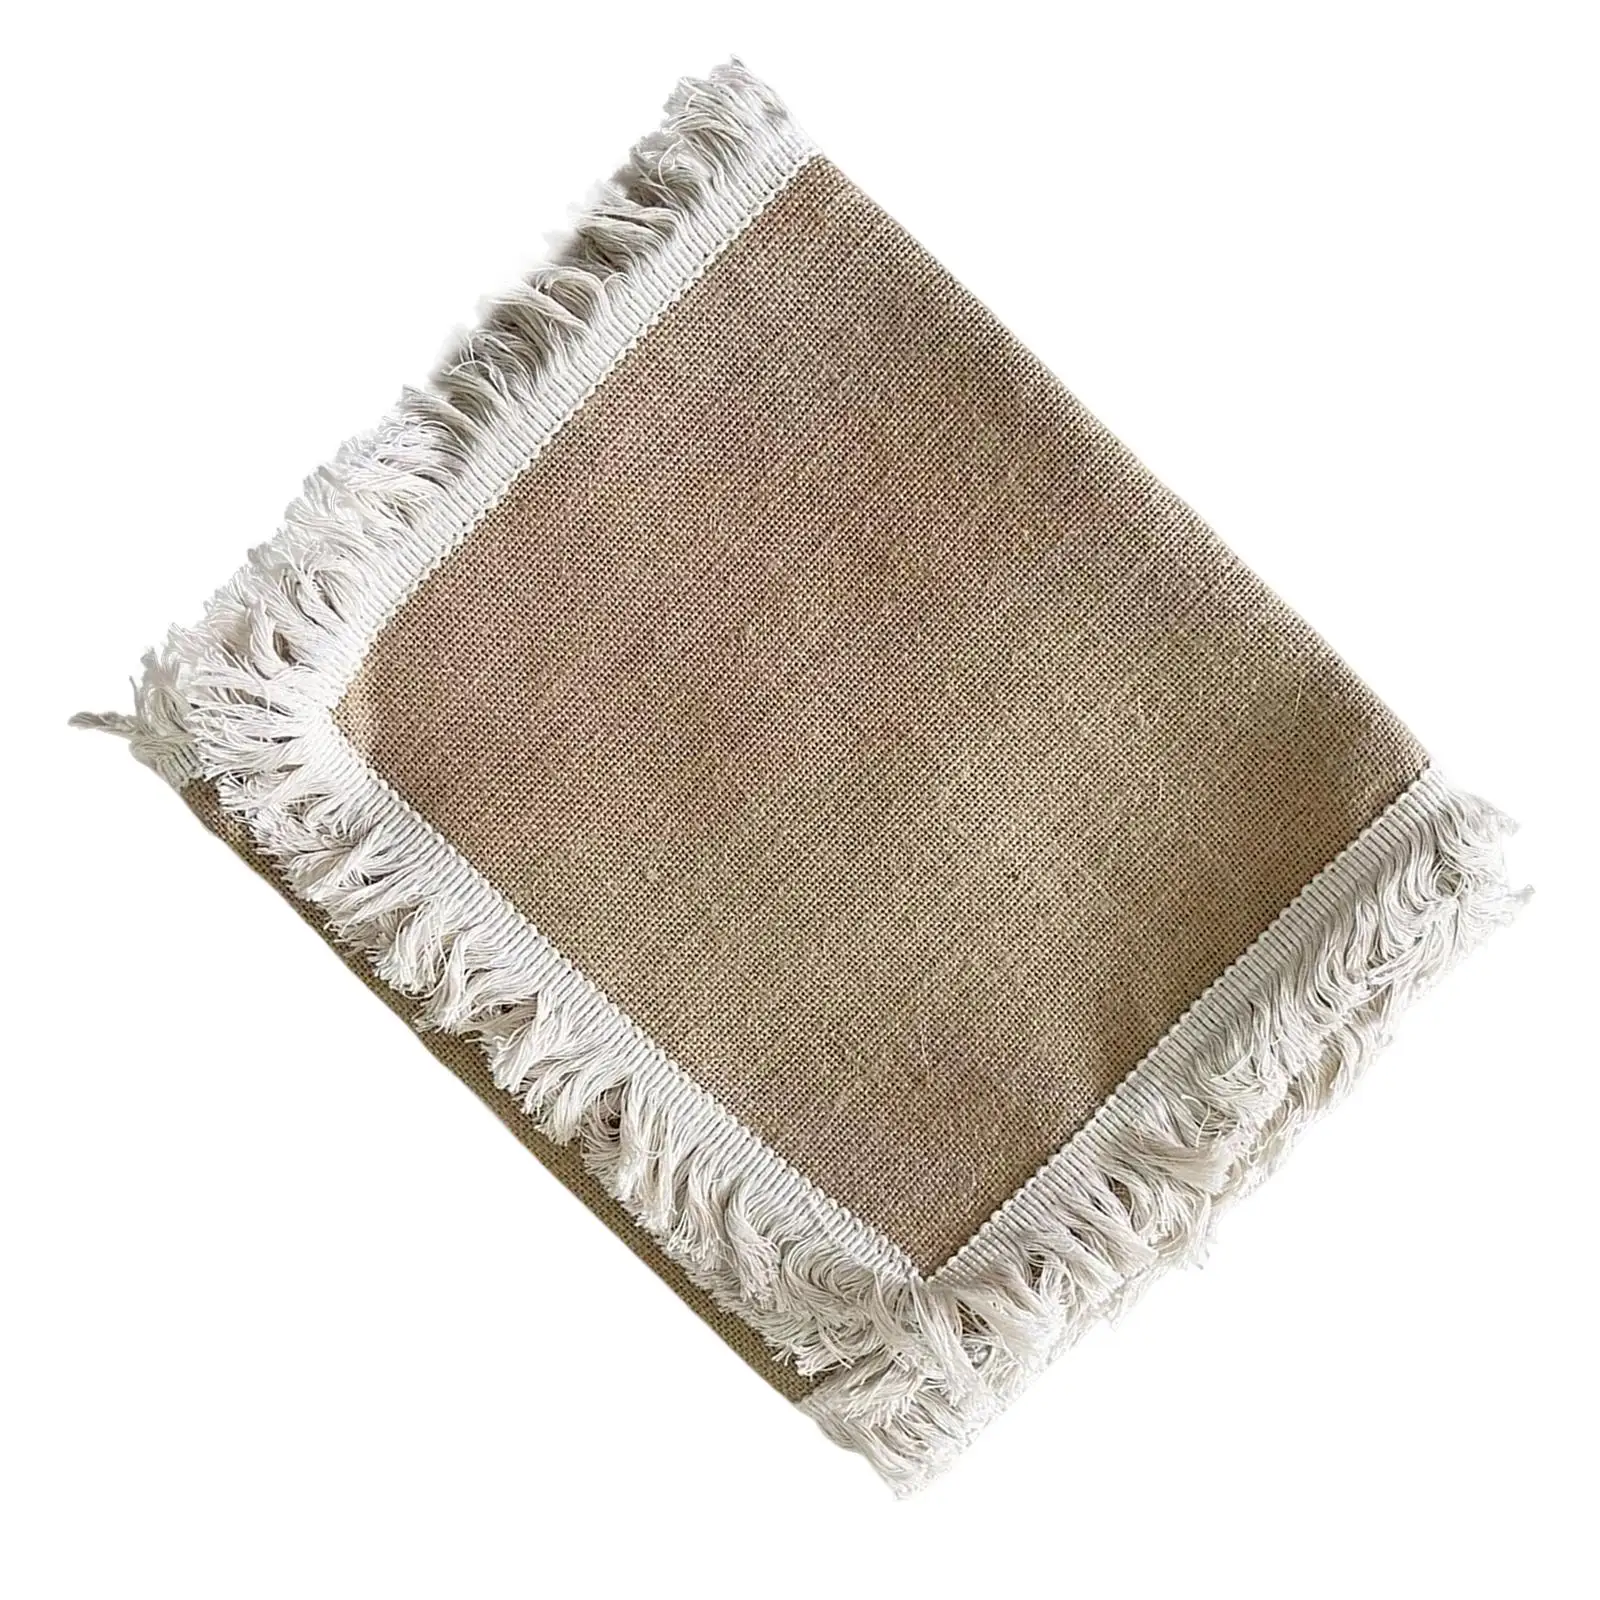 Jute Table Runner Tassel Decoration Woven Breathable Beige Tablecloth for Kitchen Banquet Picnic Tables Gardens Coffee Tables